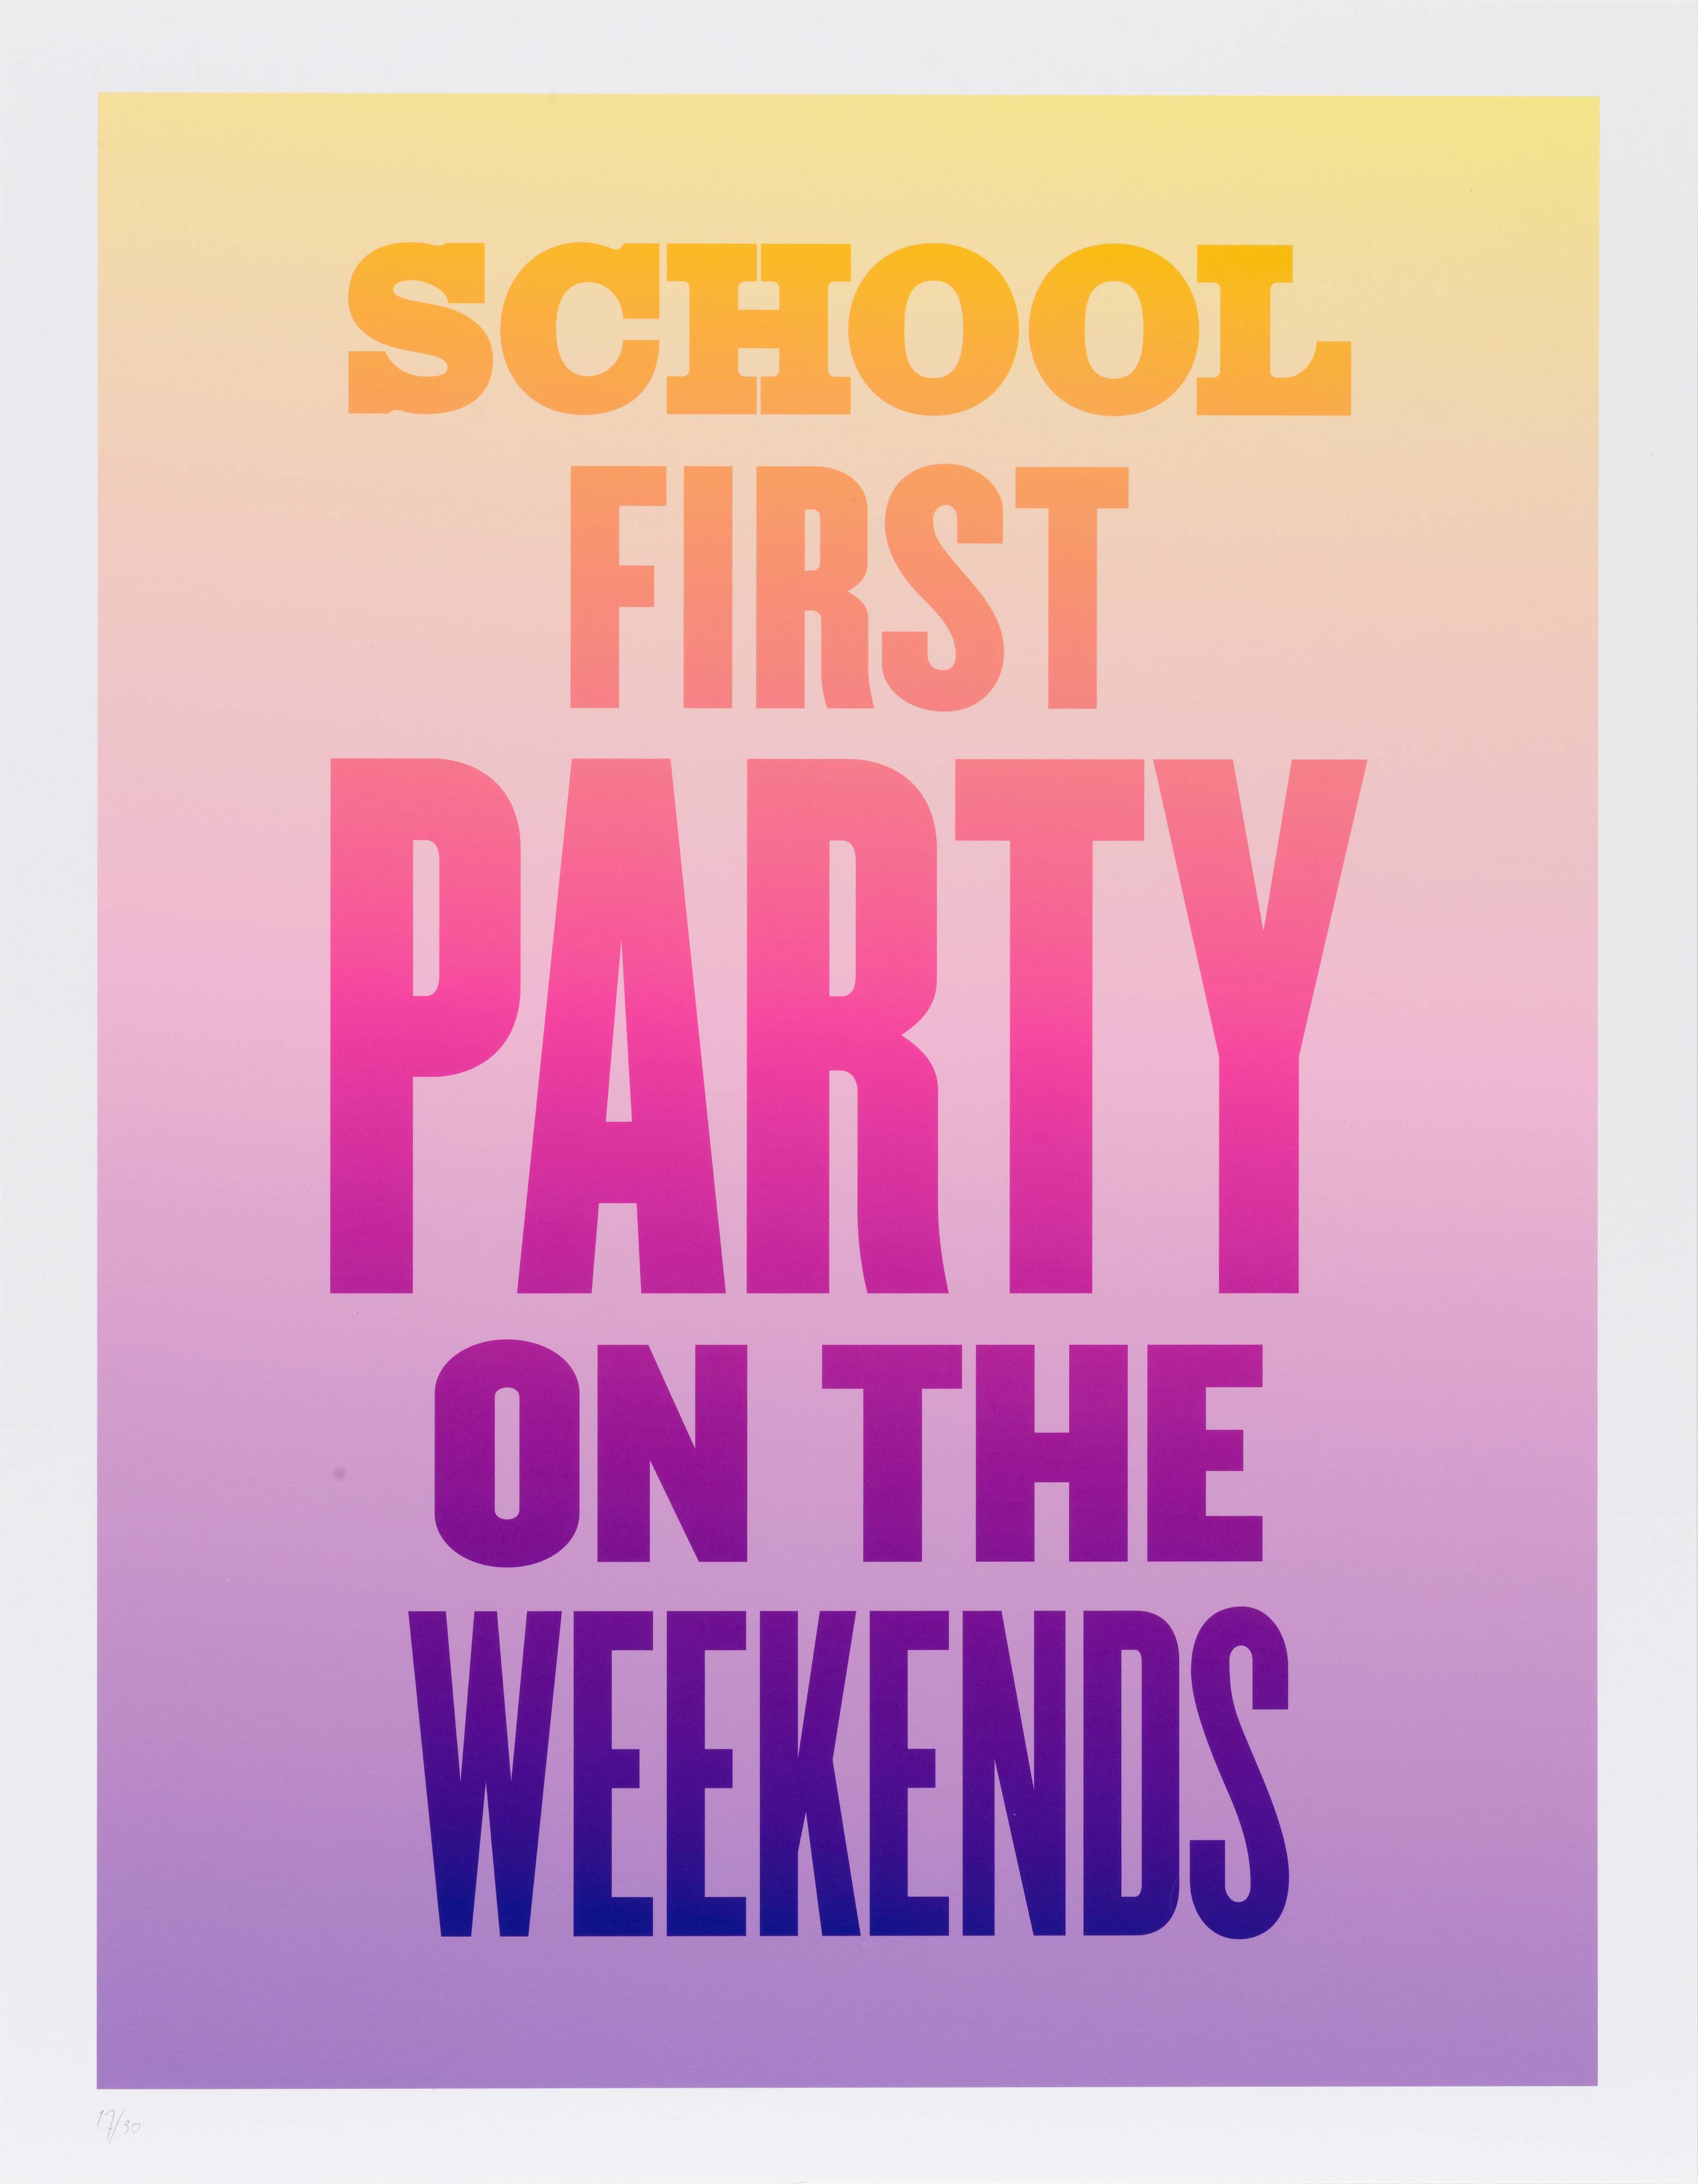 School First, Party on the Weekends, from the series Advice from my 80 Year-Old-Self